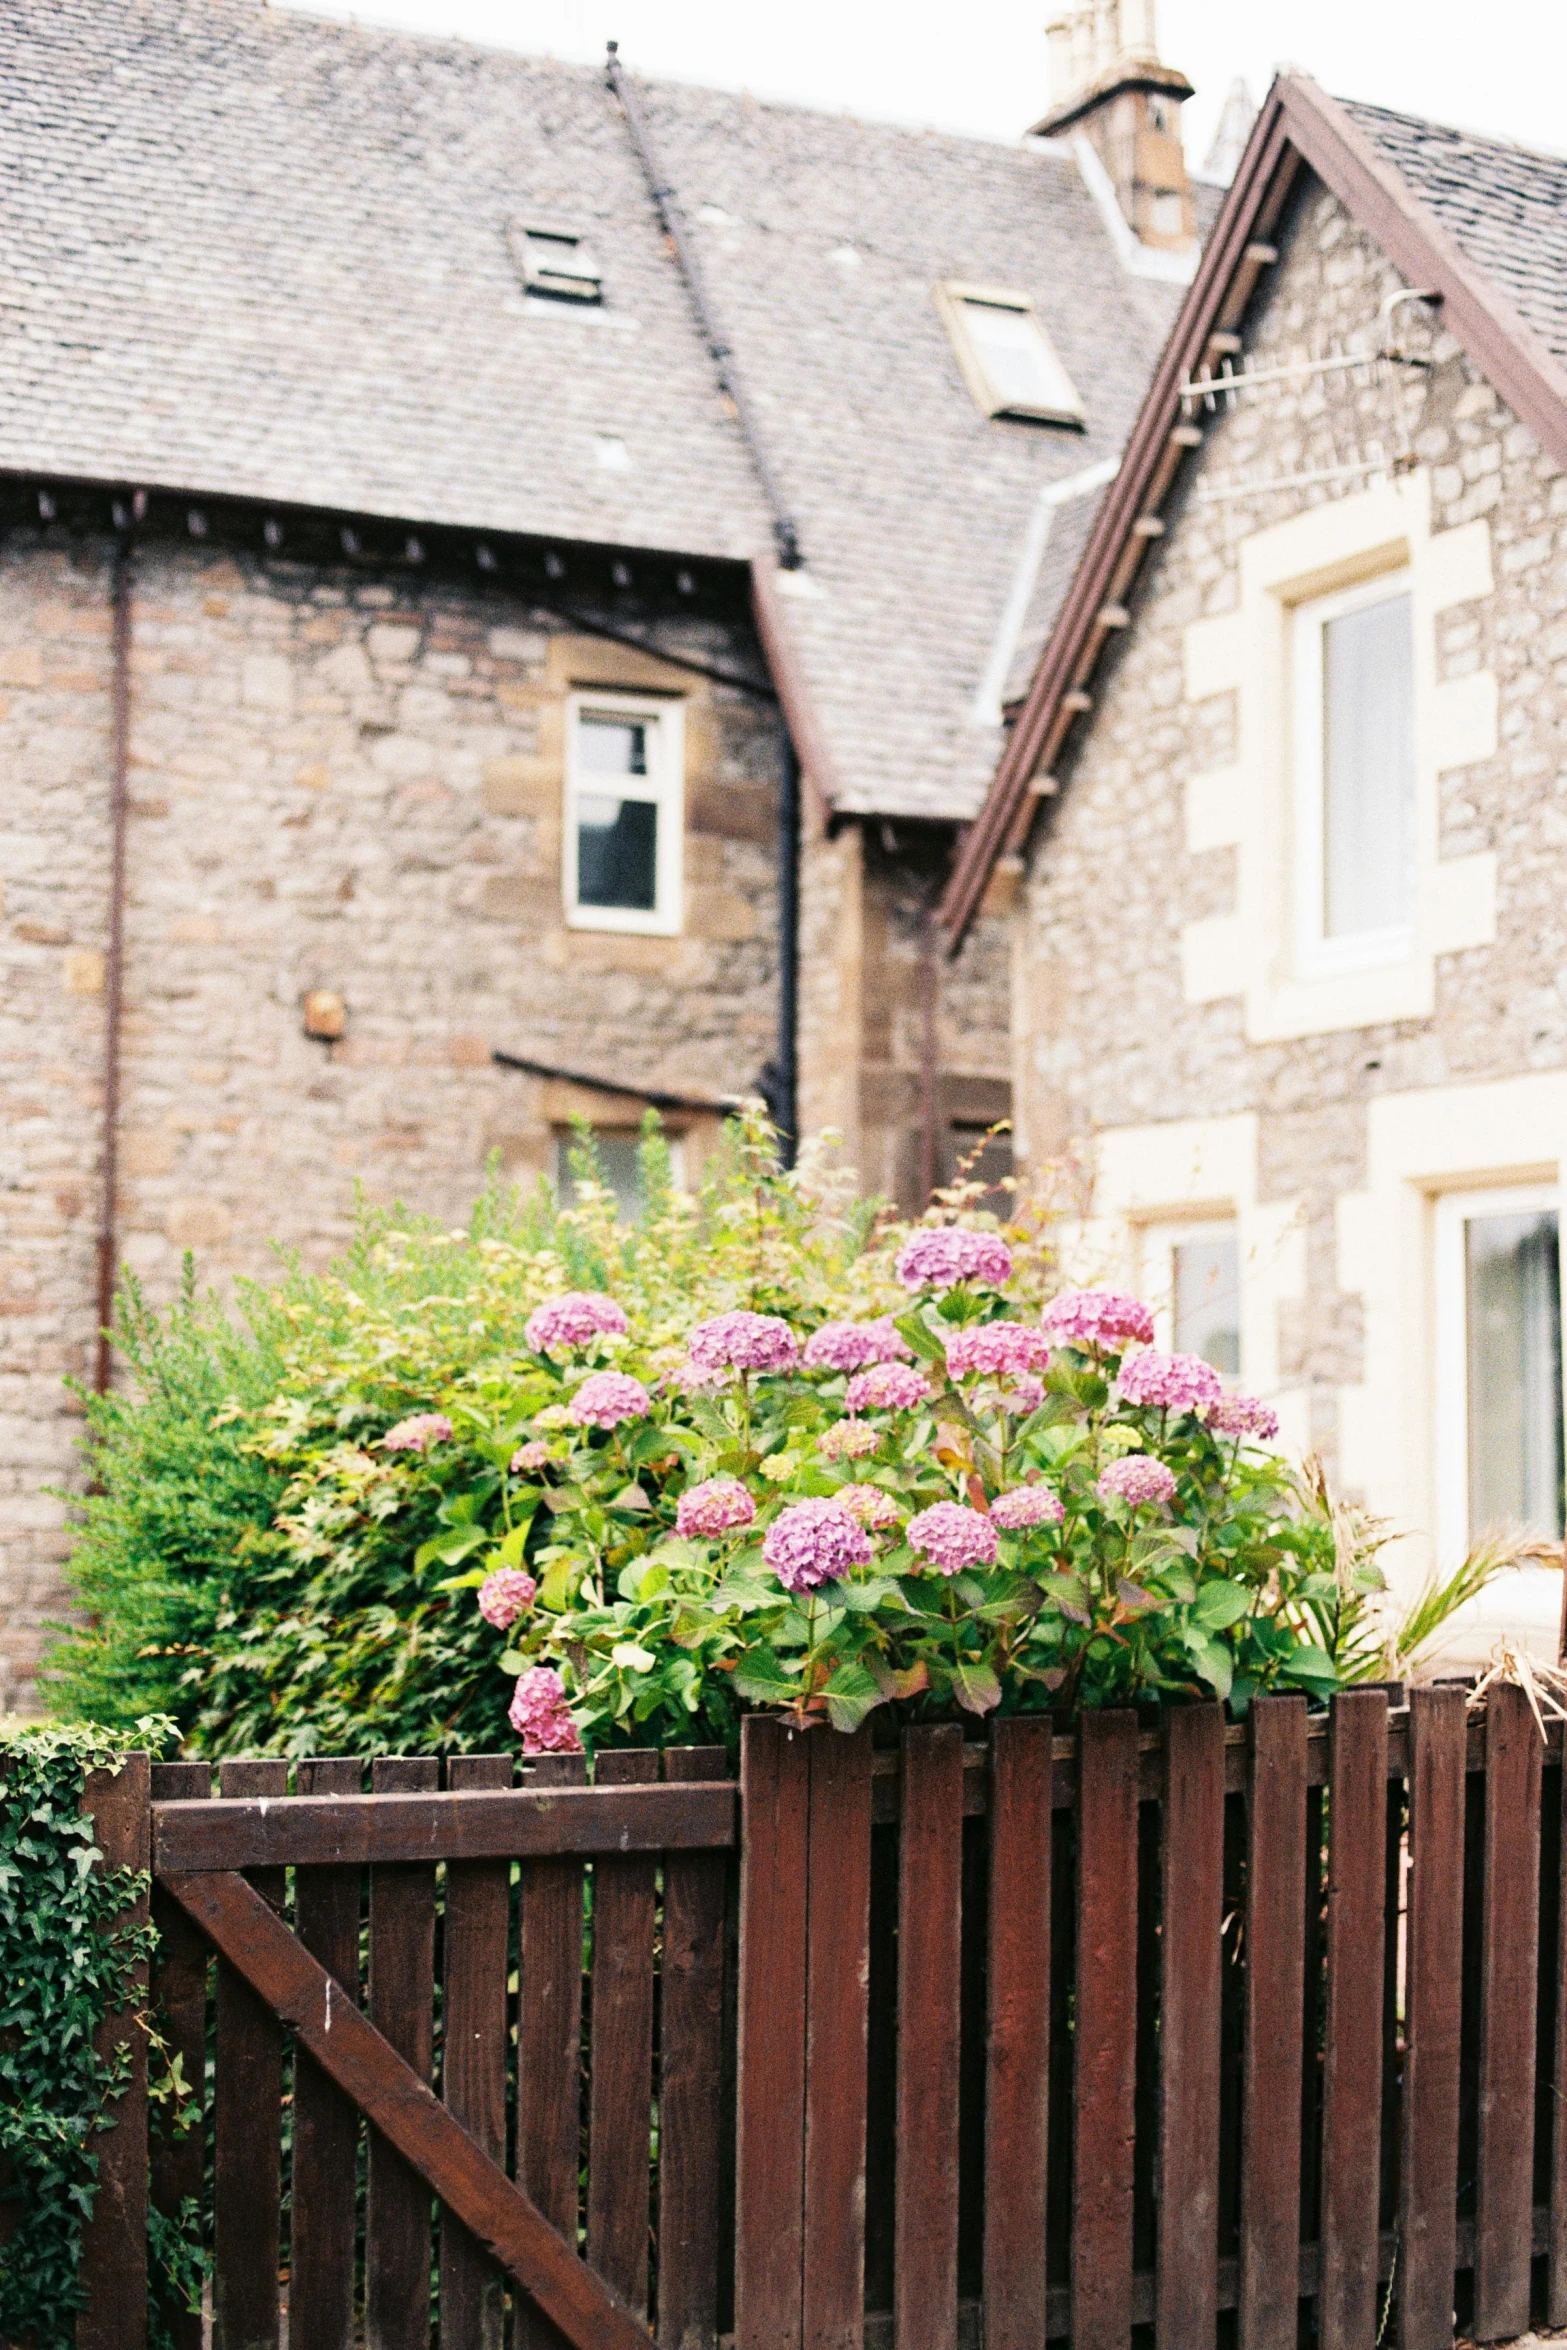 a woman sitting on a bench in front of a house, inspired by Thomas Struth, unsplash, arts and crafts movement, scotland, pink flowers, exterior view, kodak portra 400